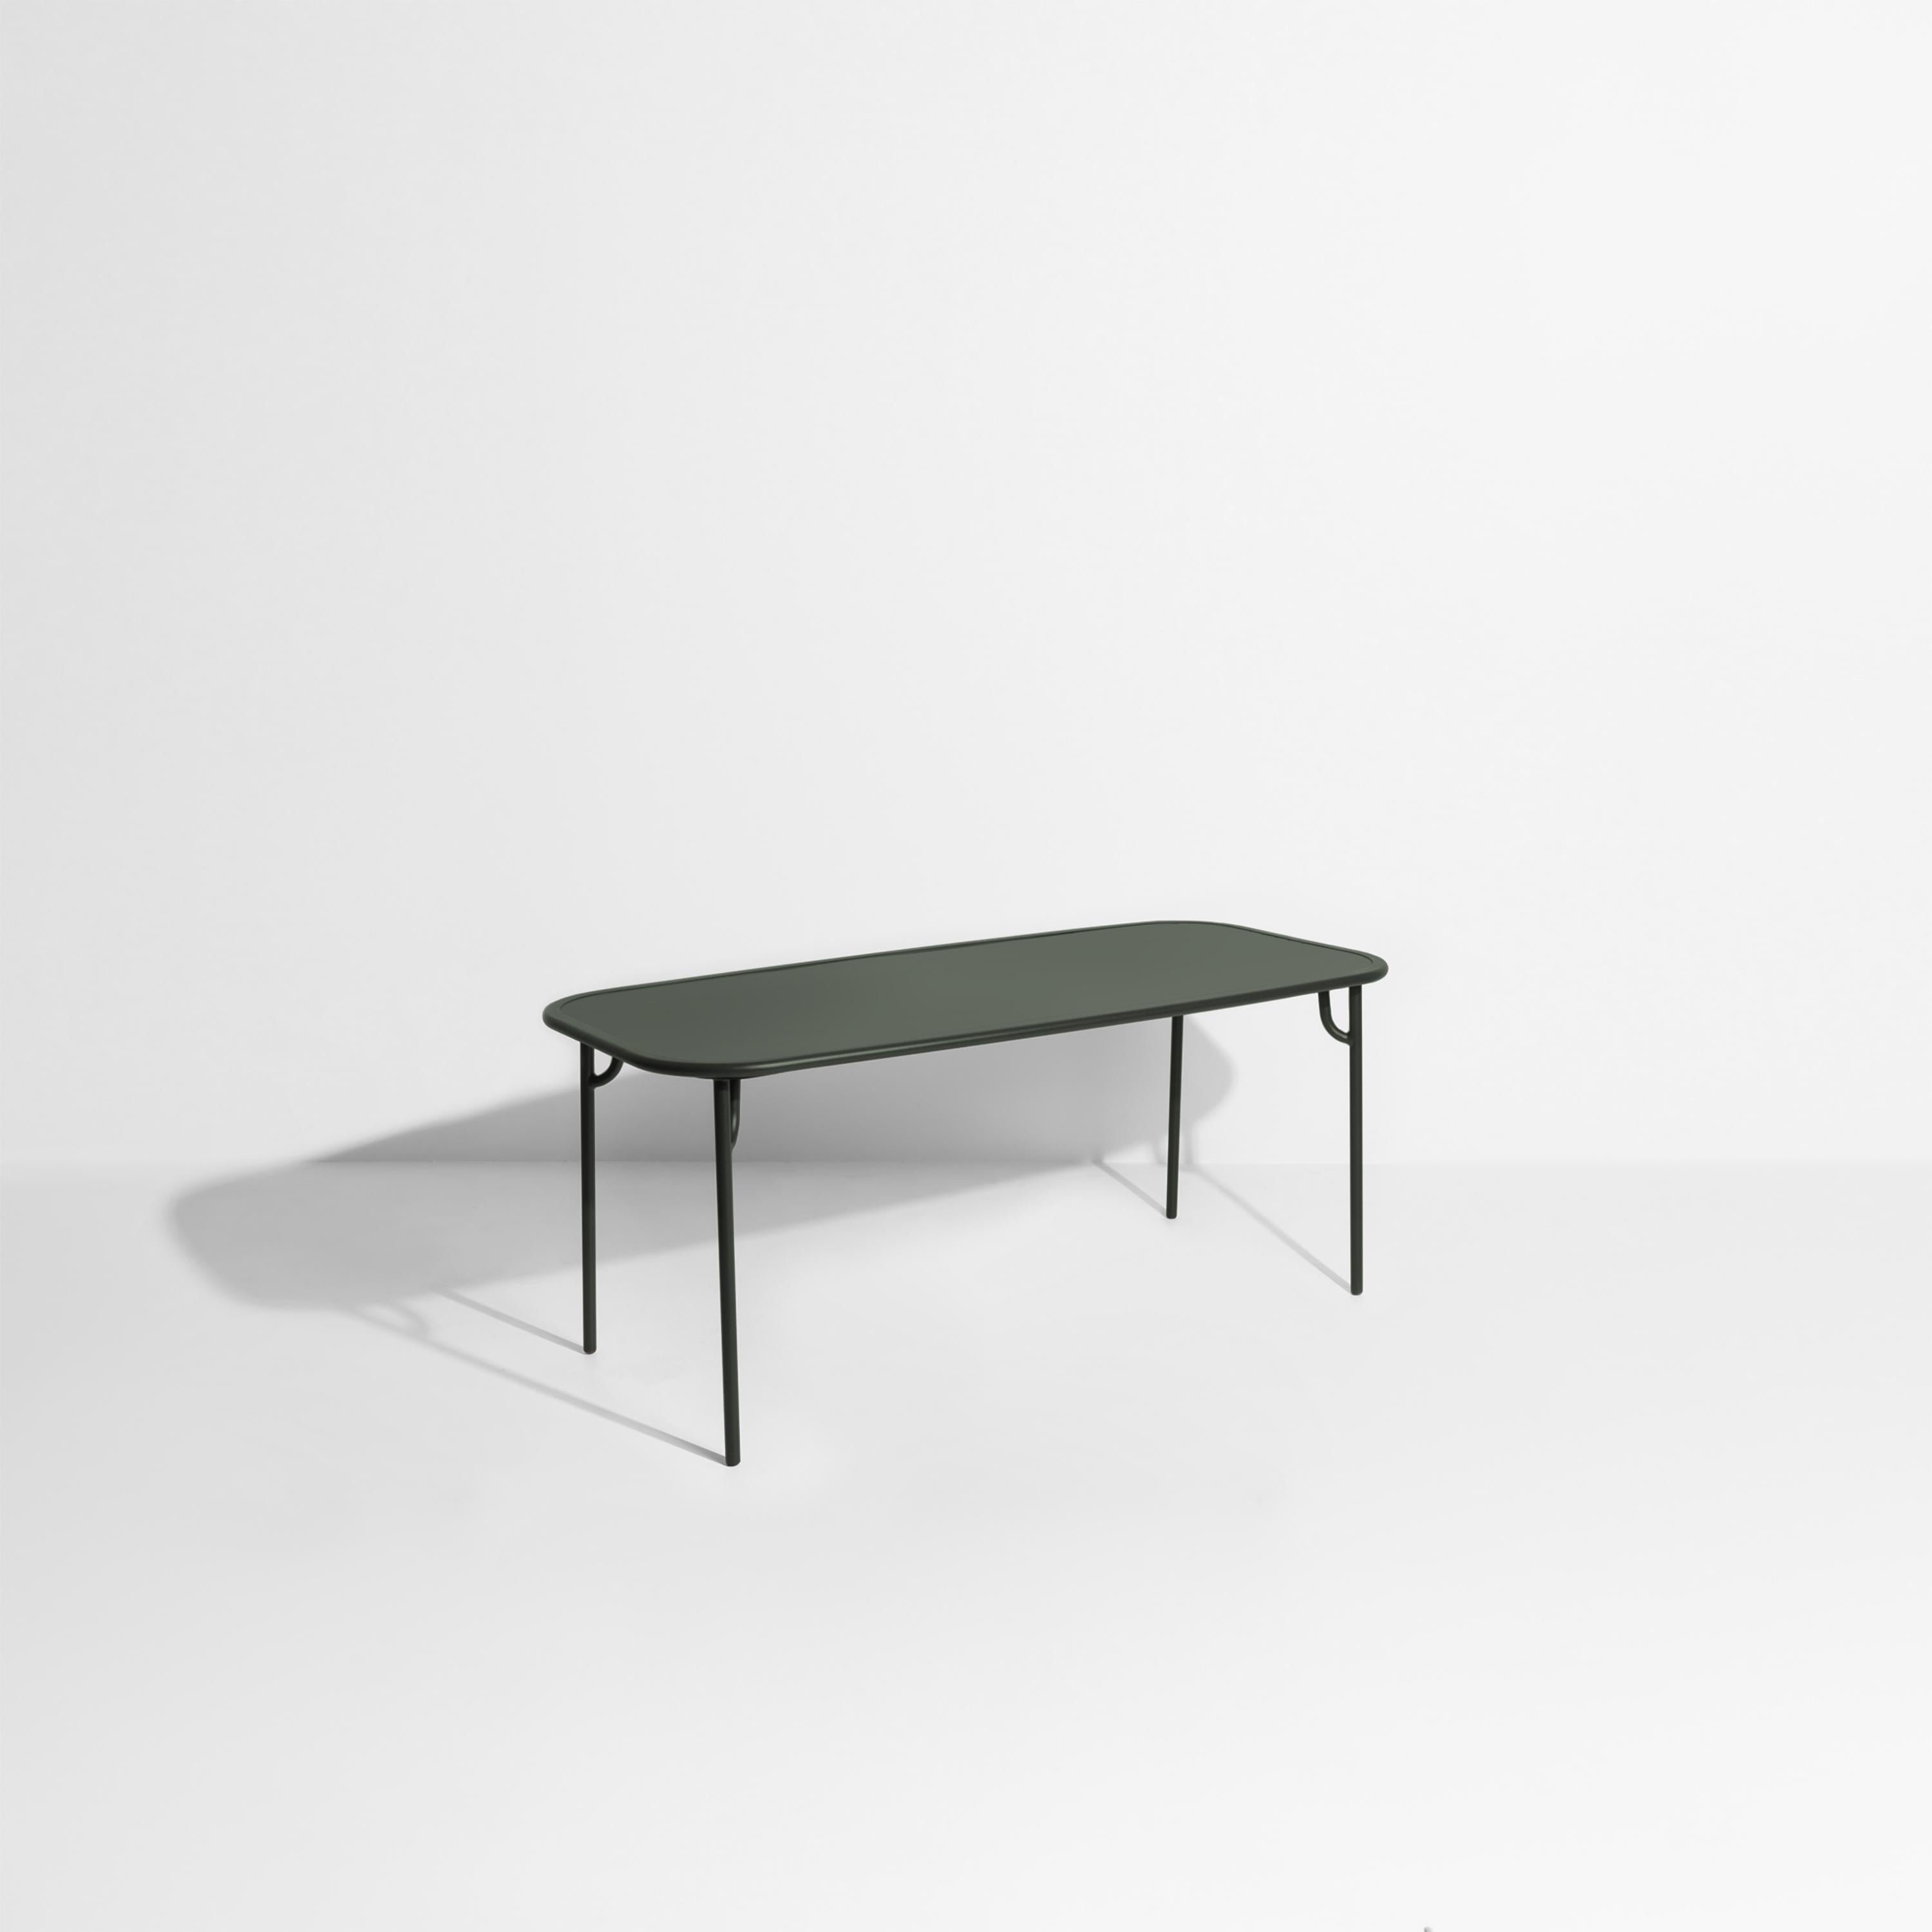 Petite Friture Week-End Medium Plain Rectangular Dining Table in Glass Green Aluminium by Studio BrichetZiegler, 2017

The week-end collection is a full range of outdoor furniture, in aluminium grained epoxy paint, matt finish, that includes 18